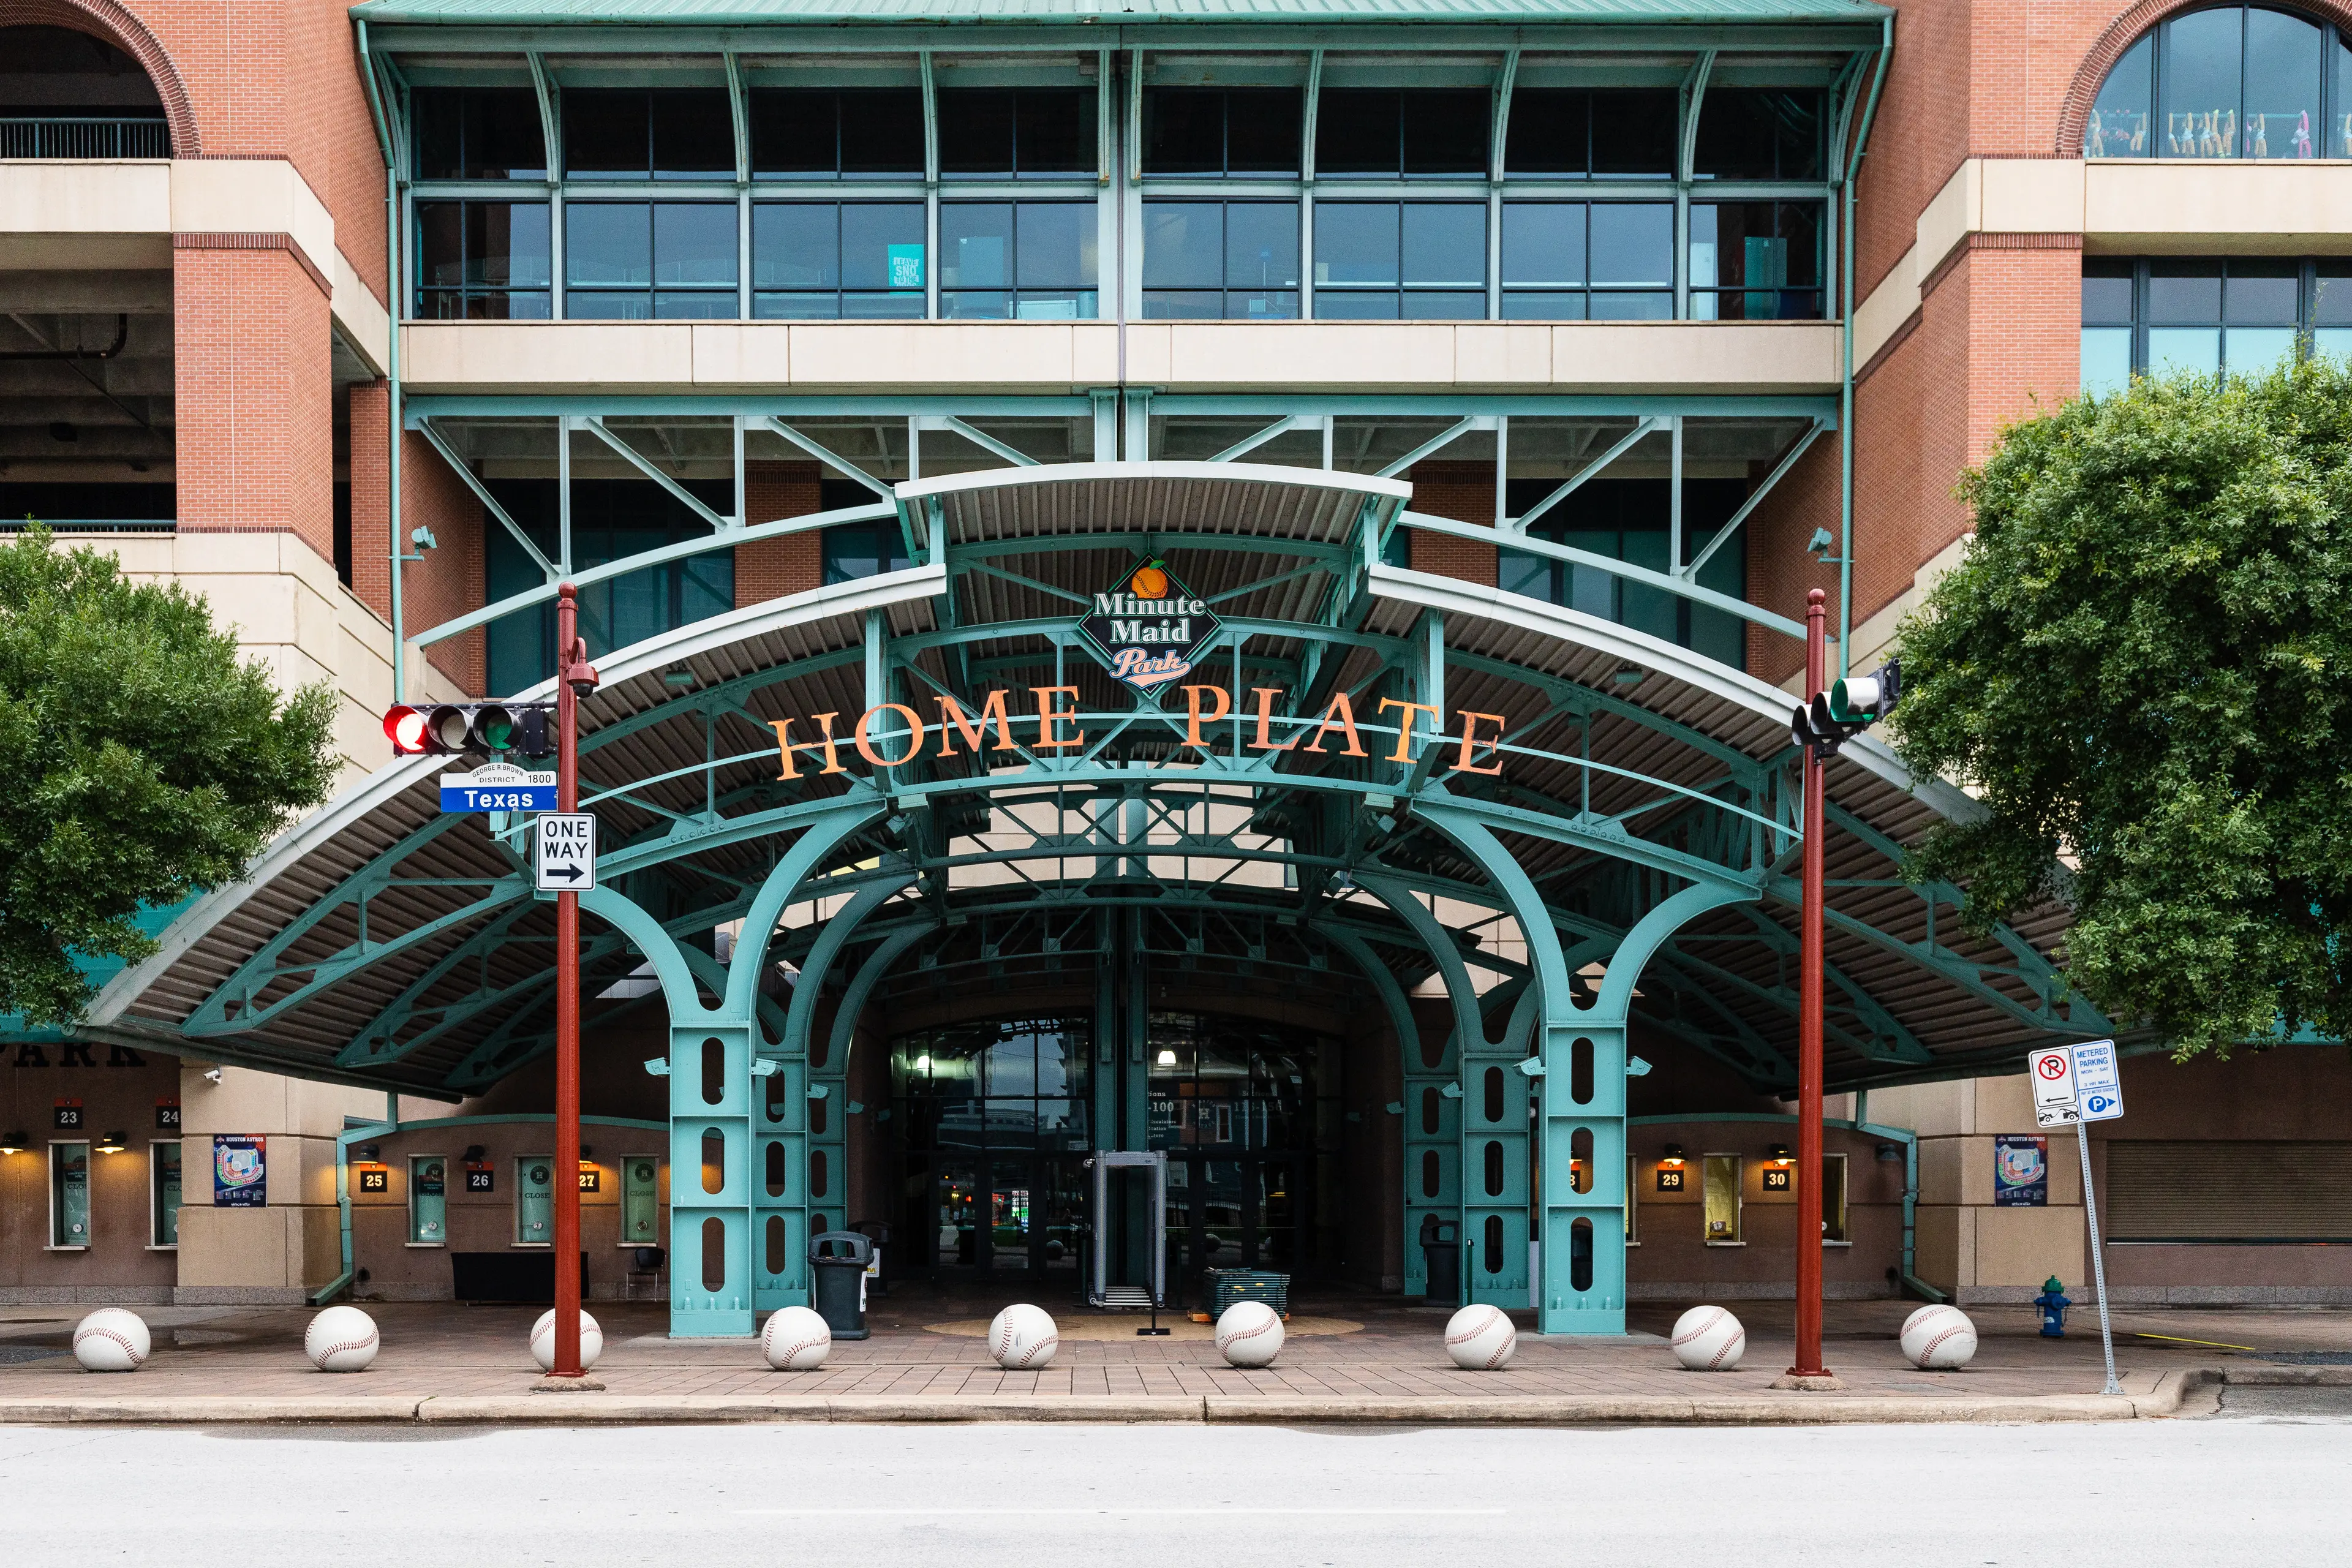 Entrance to the Minute Maid Stadium